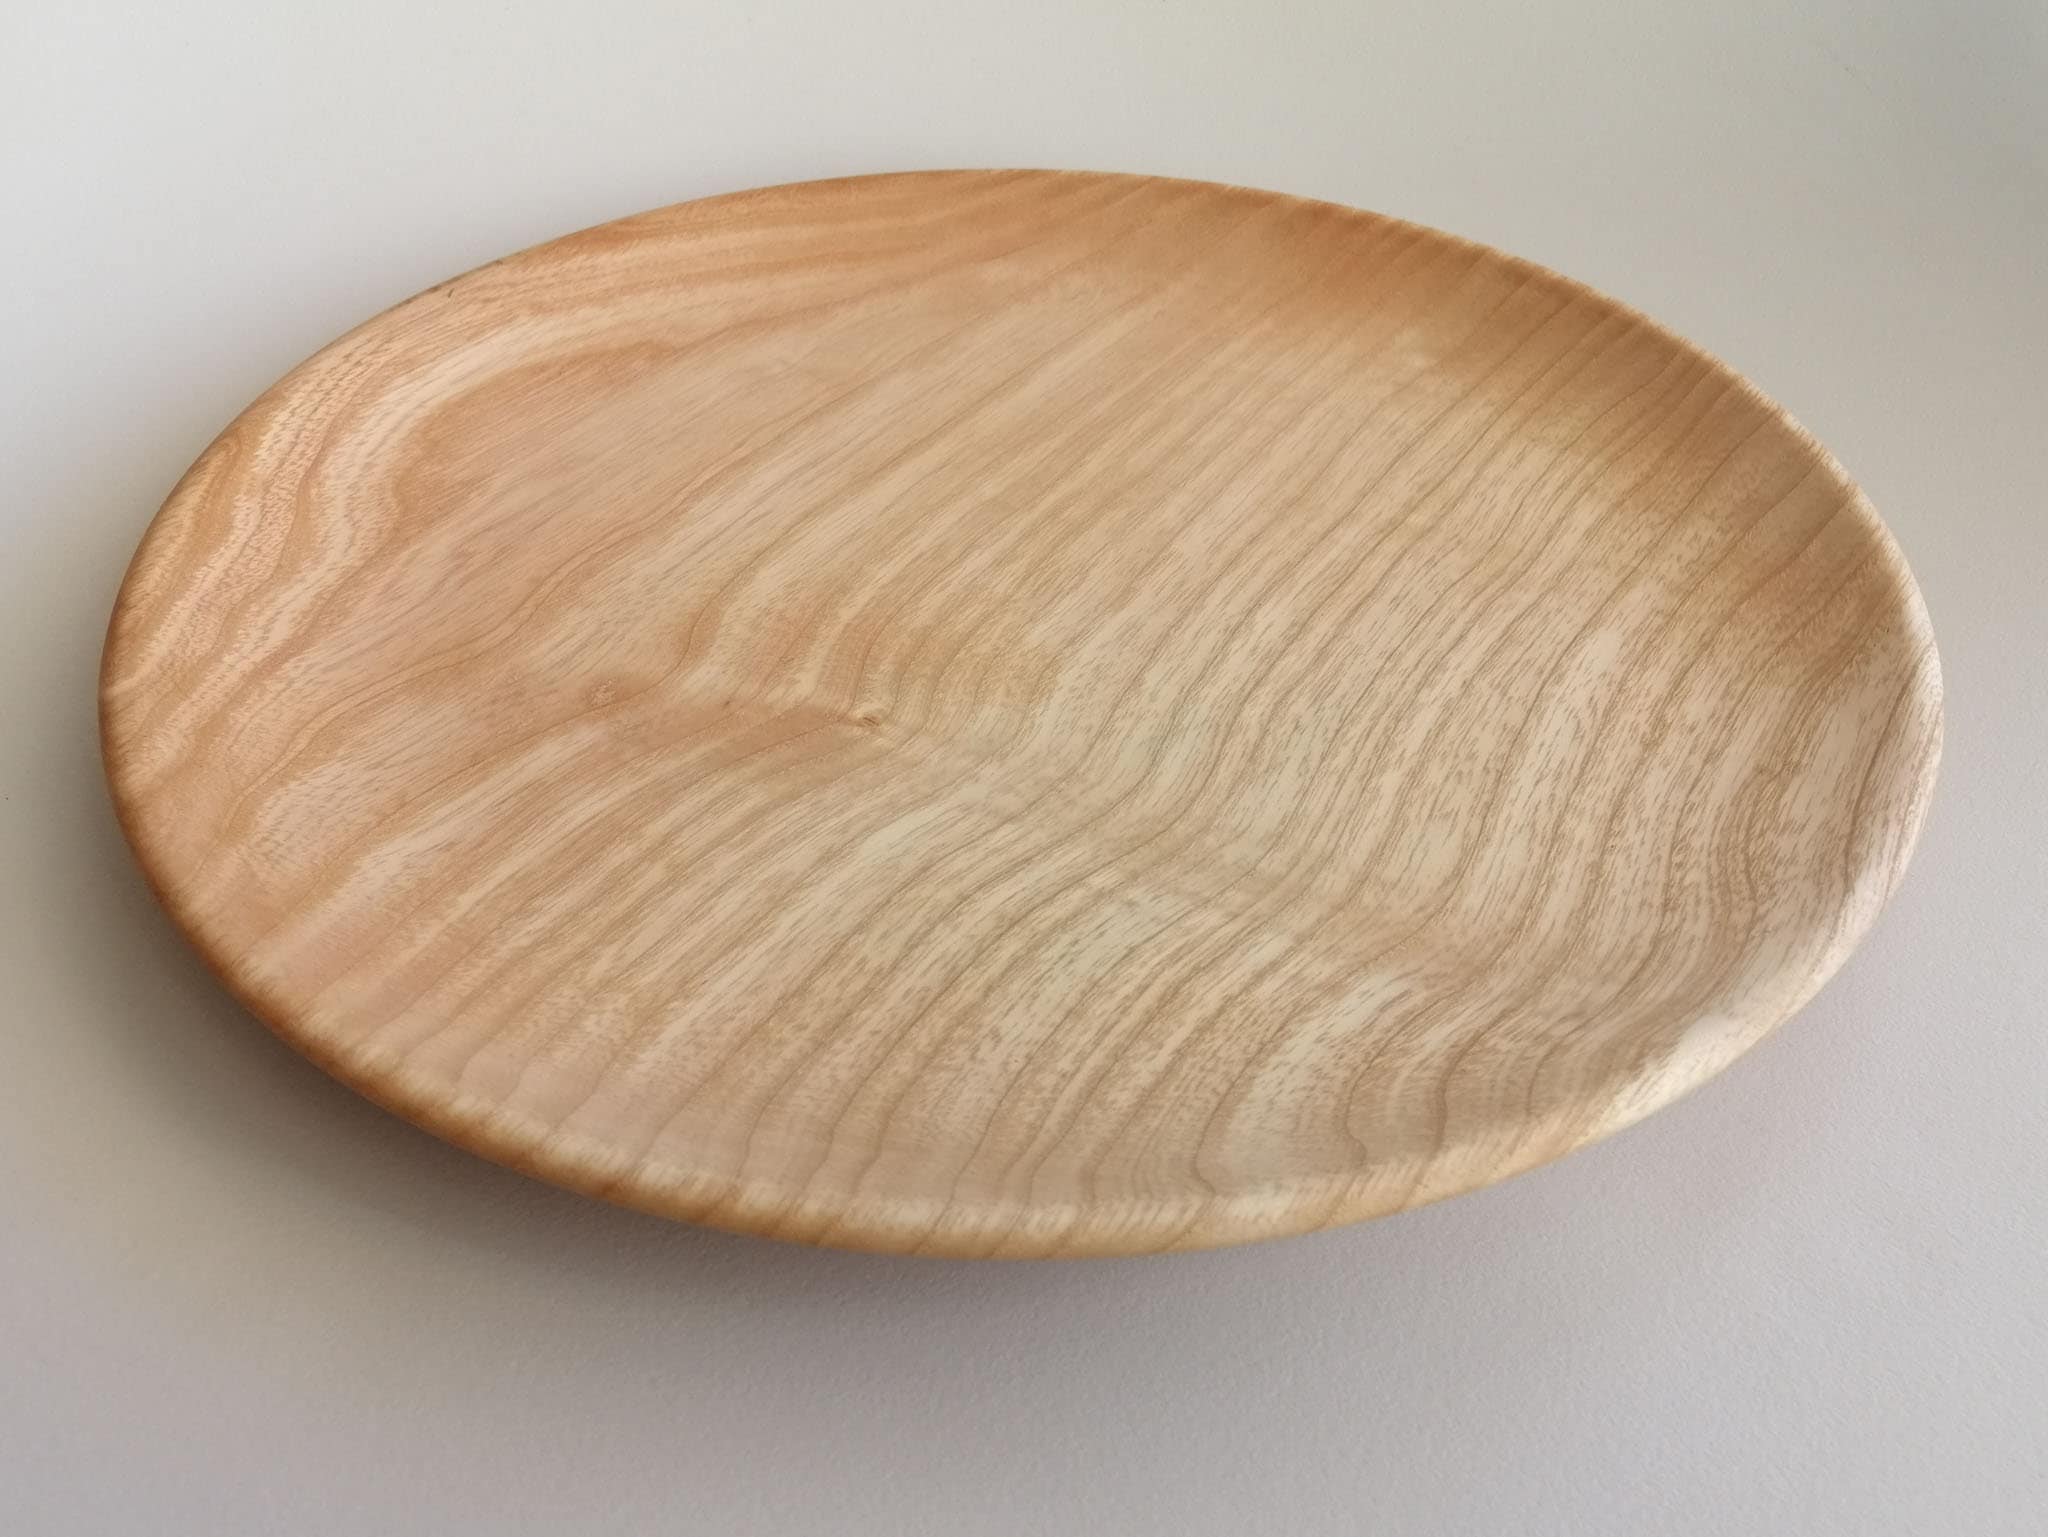 Flat plate. Wooden Plate. Chair made of Ash Wood.